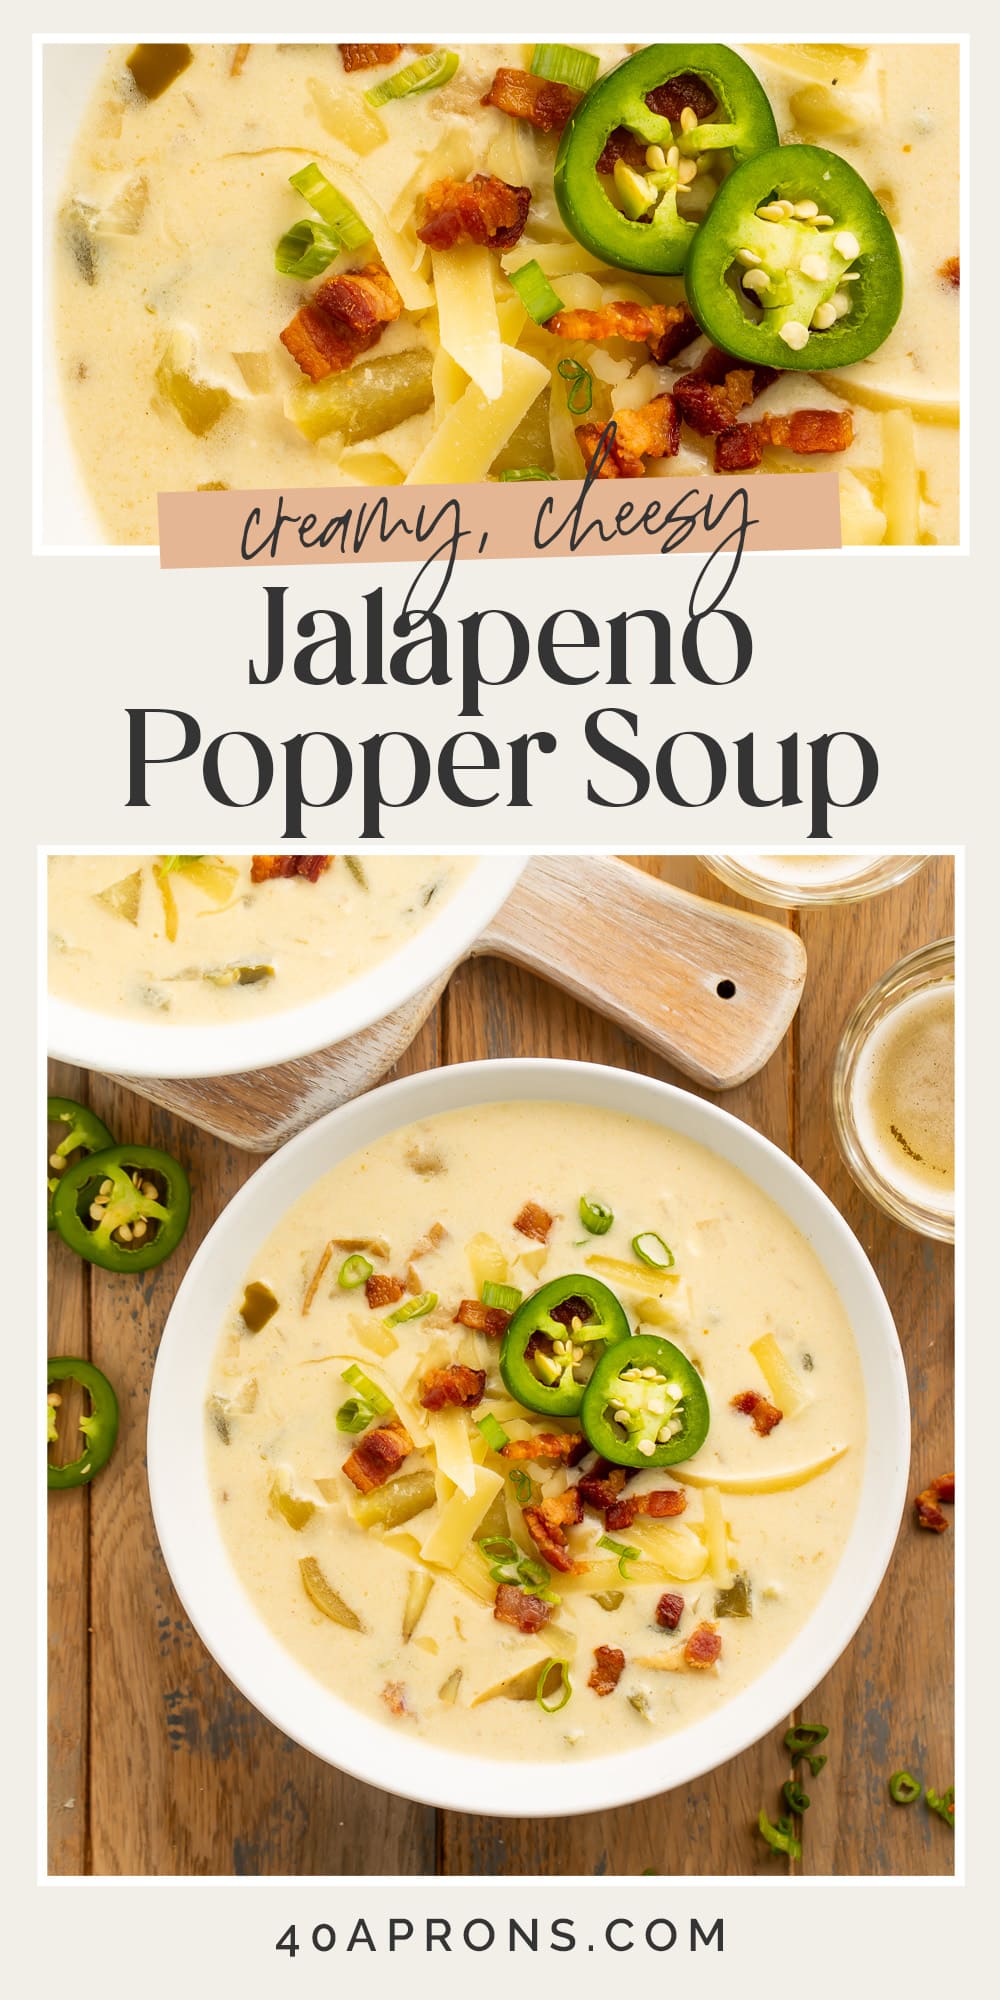 Pin graphic for jalapeño popper soup.